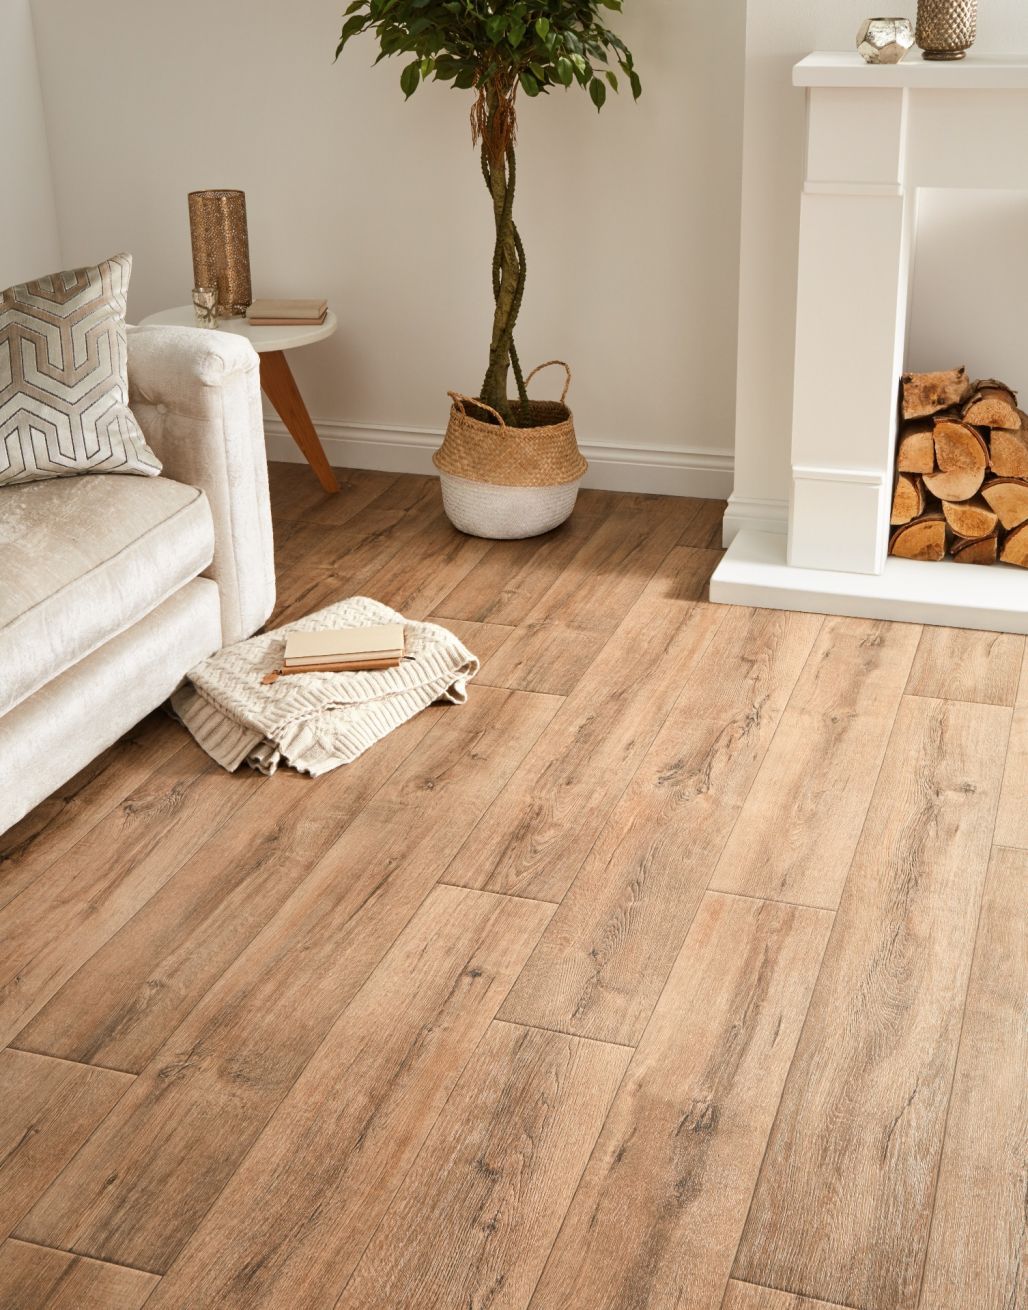 What makes wooden floors the right choice for your home?